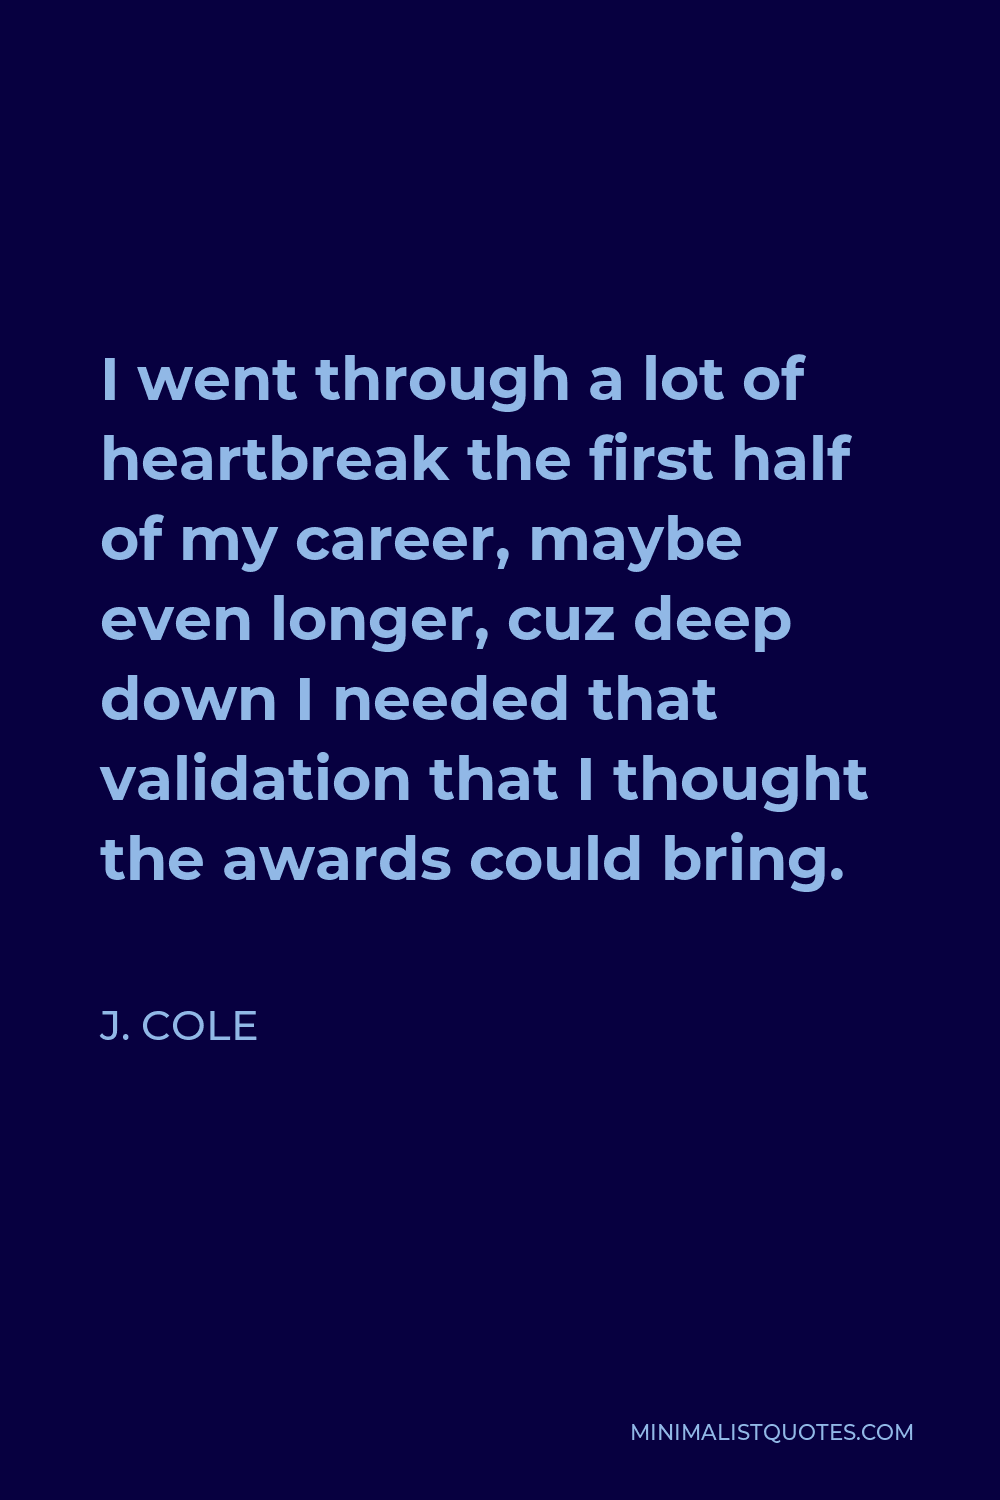 J. Cole Quote - I went through a lot of heartbreak the first half of my career, maybe even longer, cuz deep down I needed that validation that I thought the awards could bring.